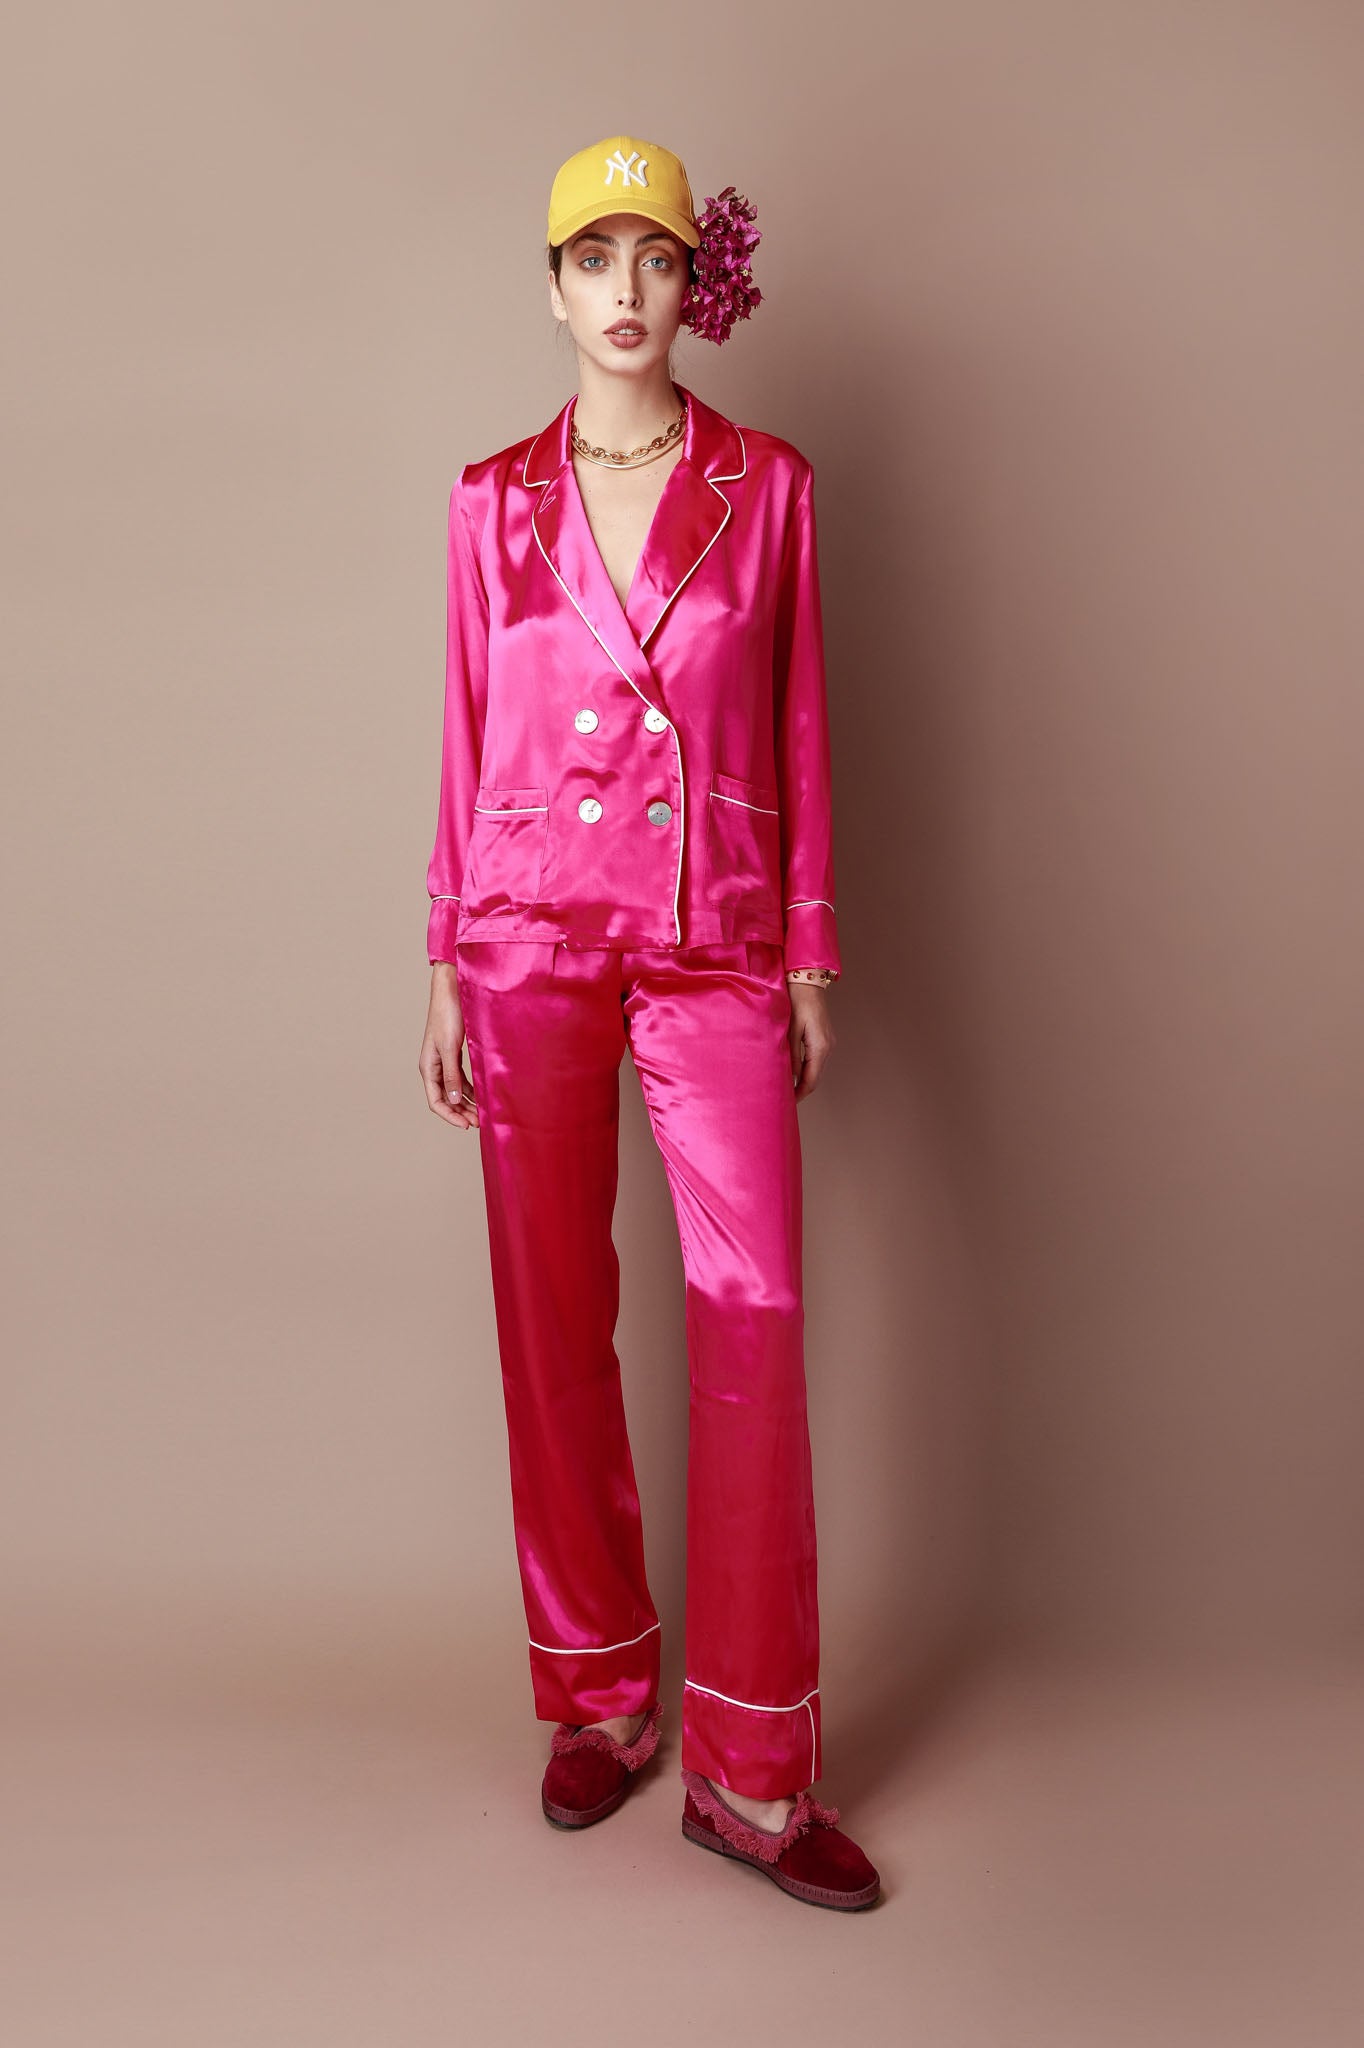 Silk Pajama Set in Vibrant Fuchsia from Atelier Collection